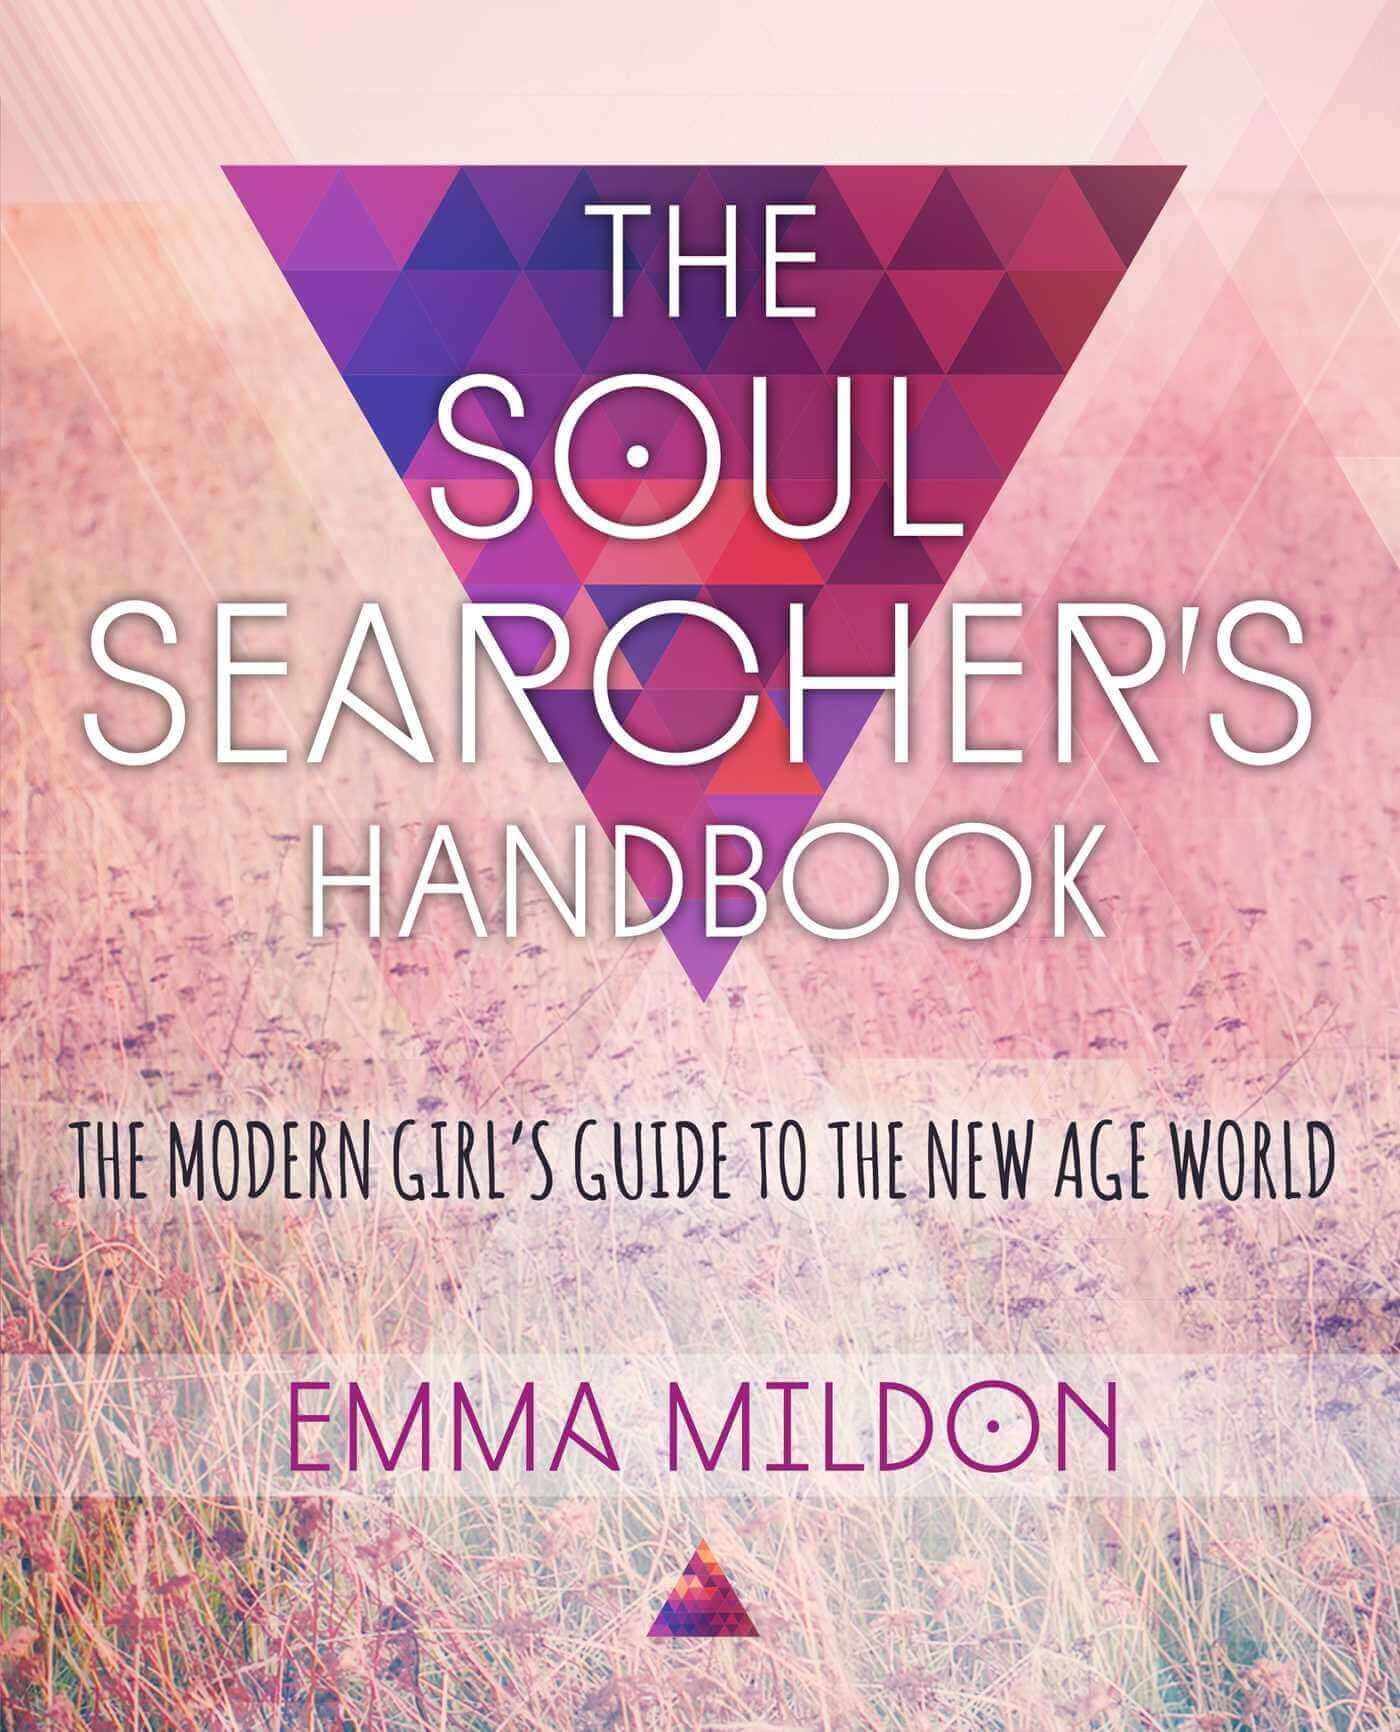 THE SOUL SEARCHER'S HANDBOOK: A MODERN GIRL'S GUIDE TO THE NEW AGE WORLD at $19 only from Spiral Rain